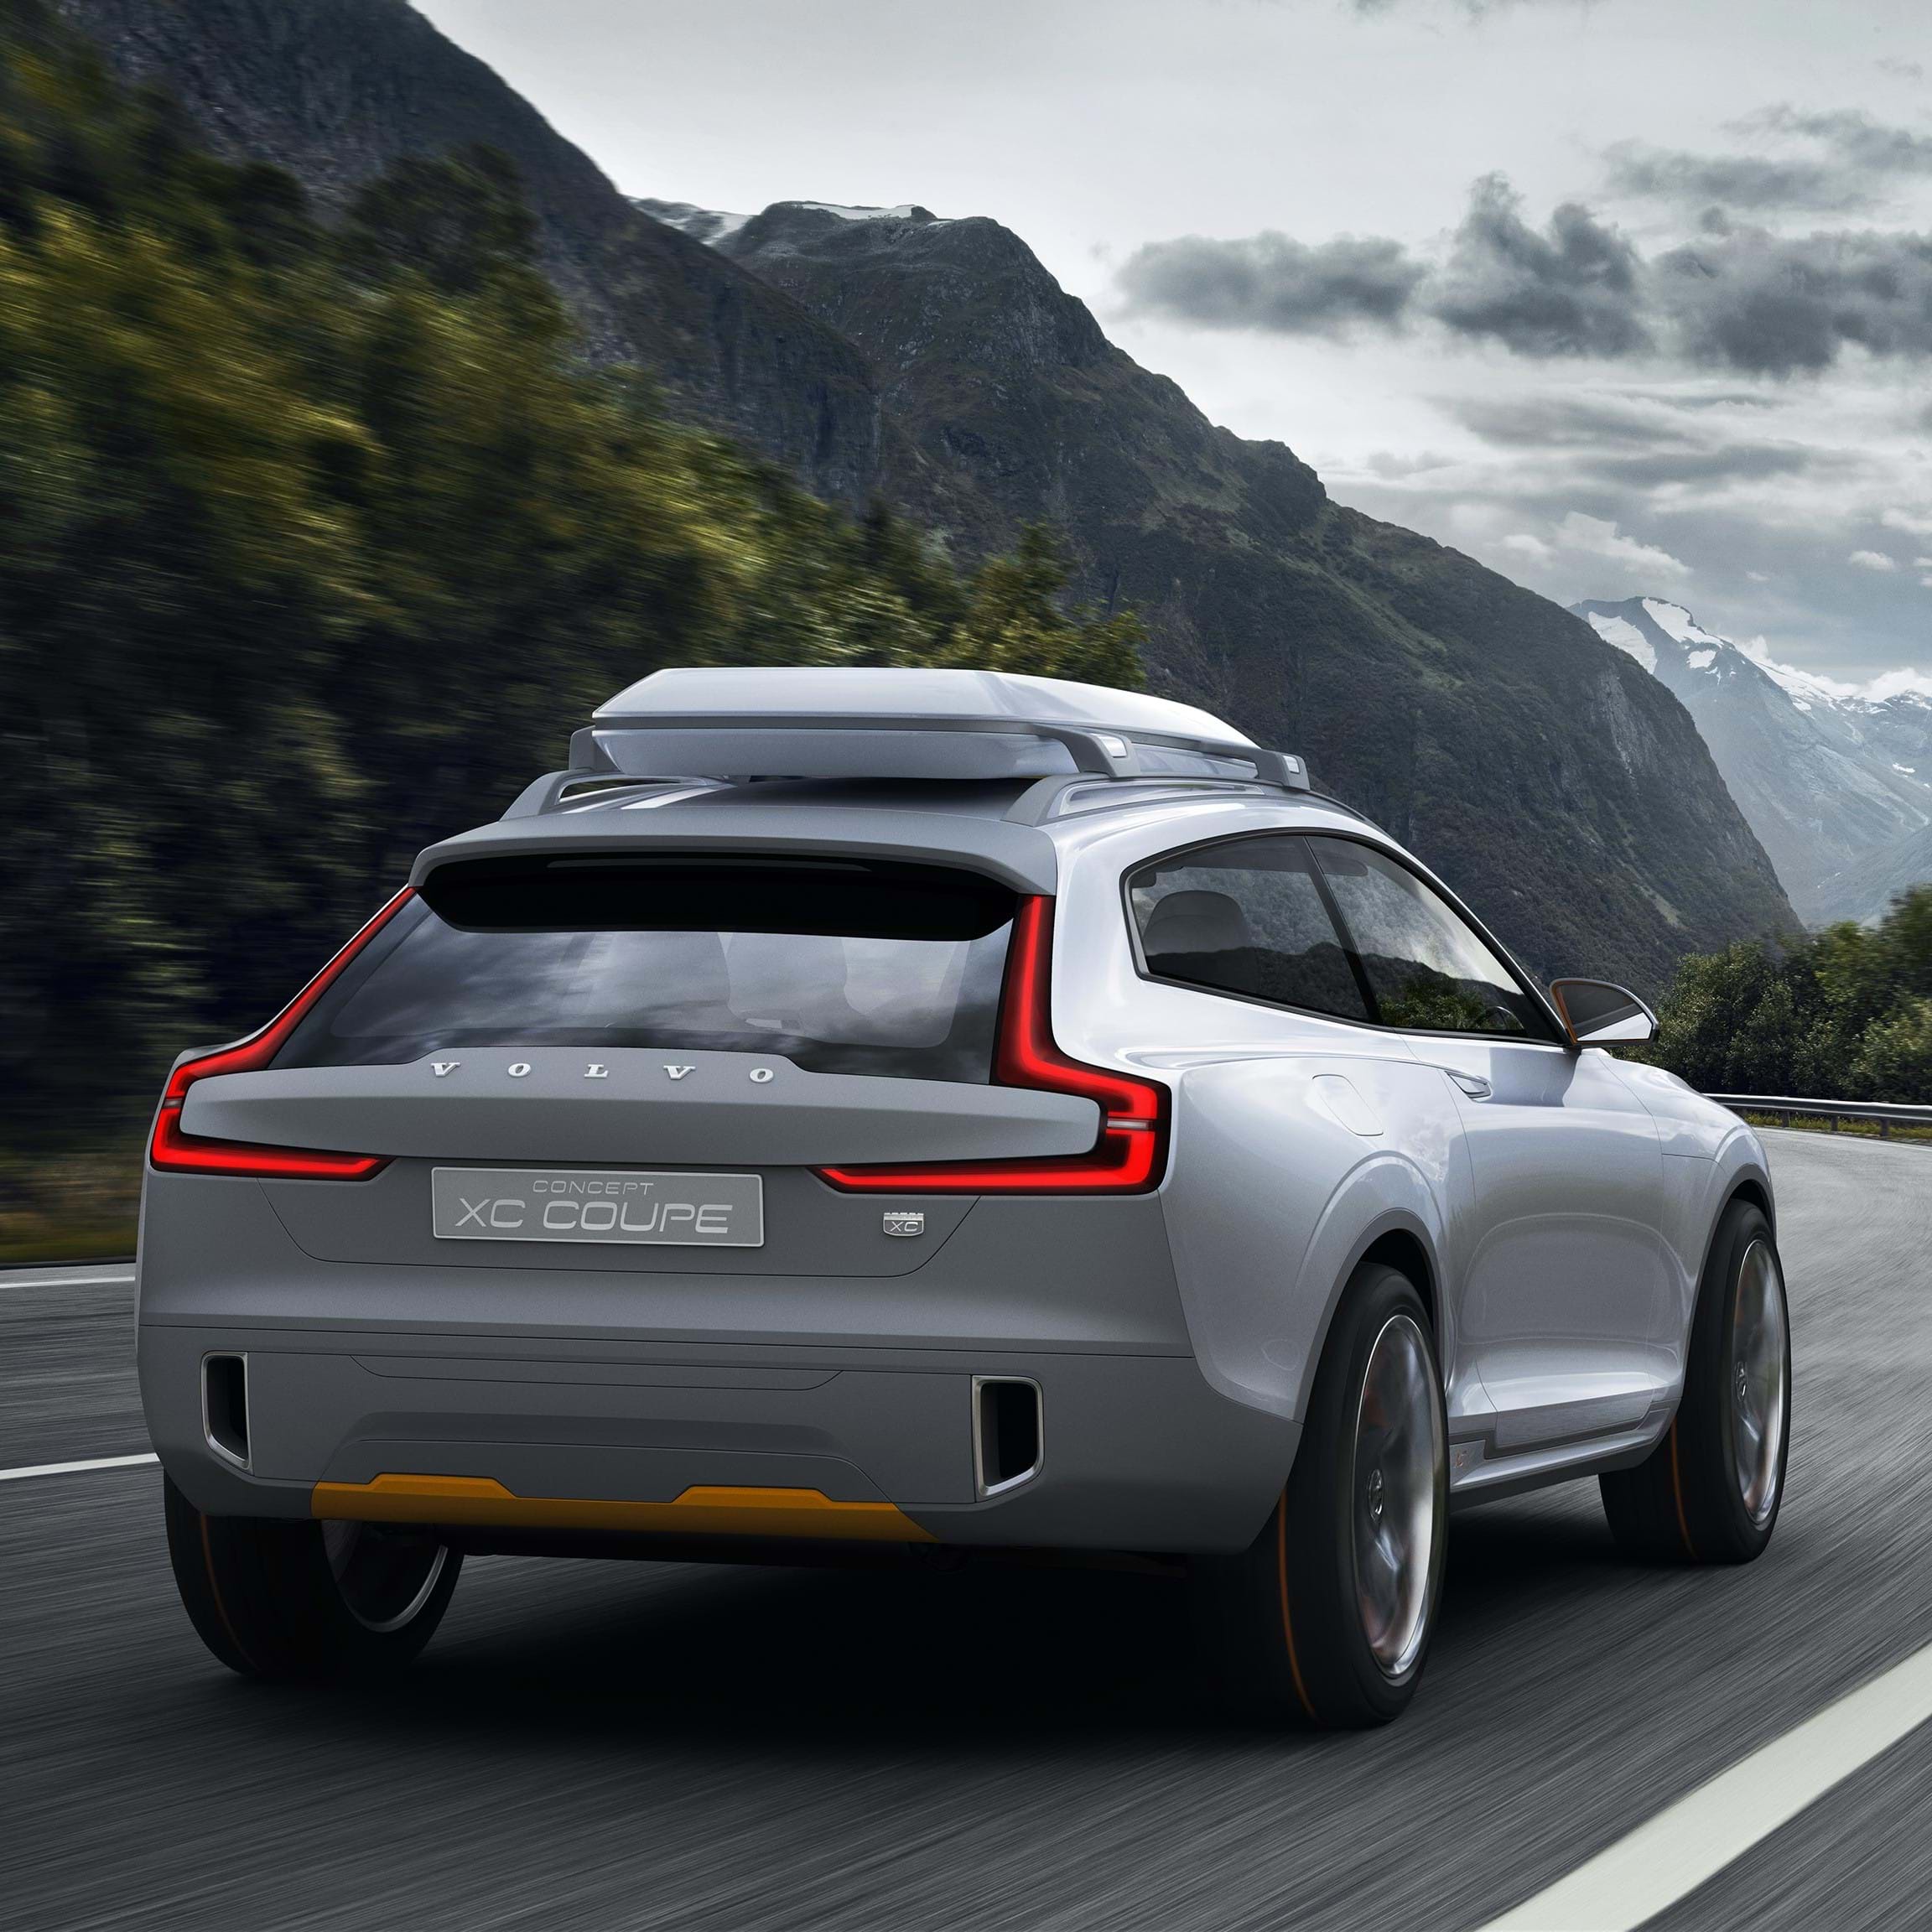 Volvo XC Coupe concept car driving along mountain highway